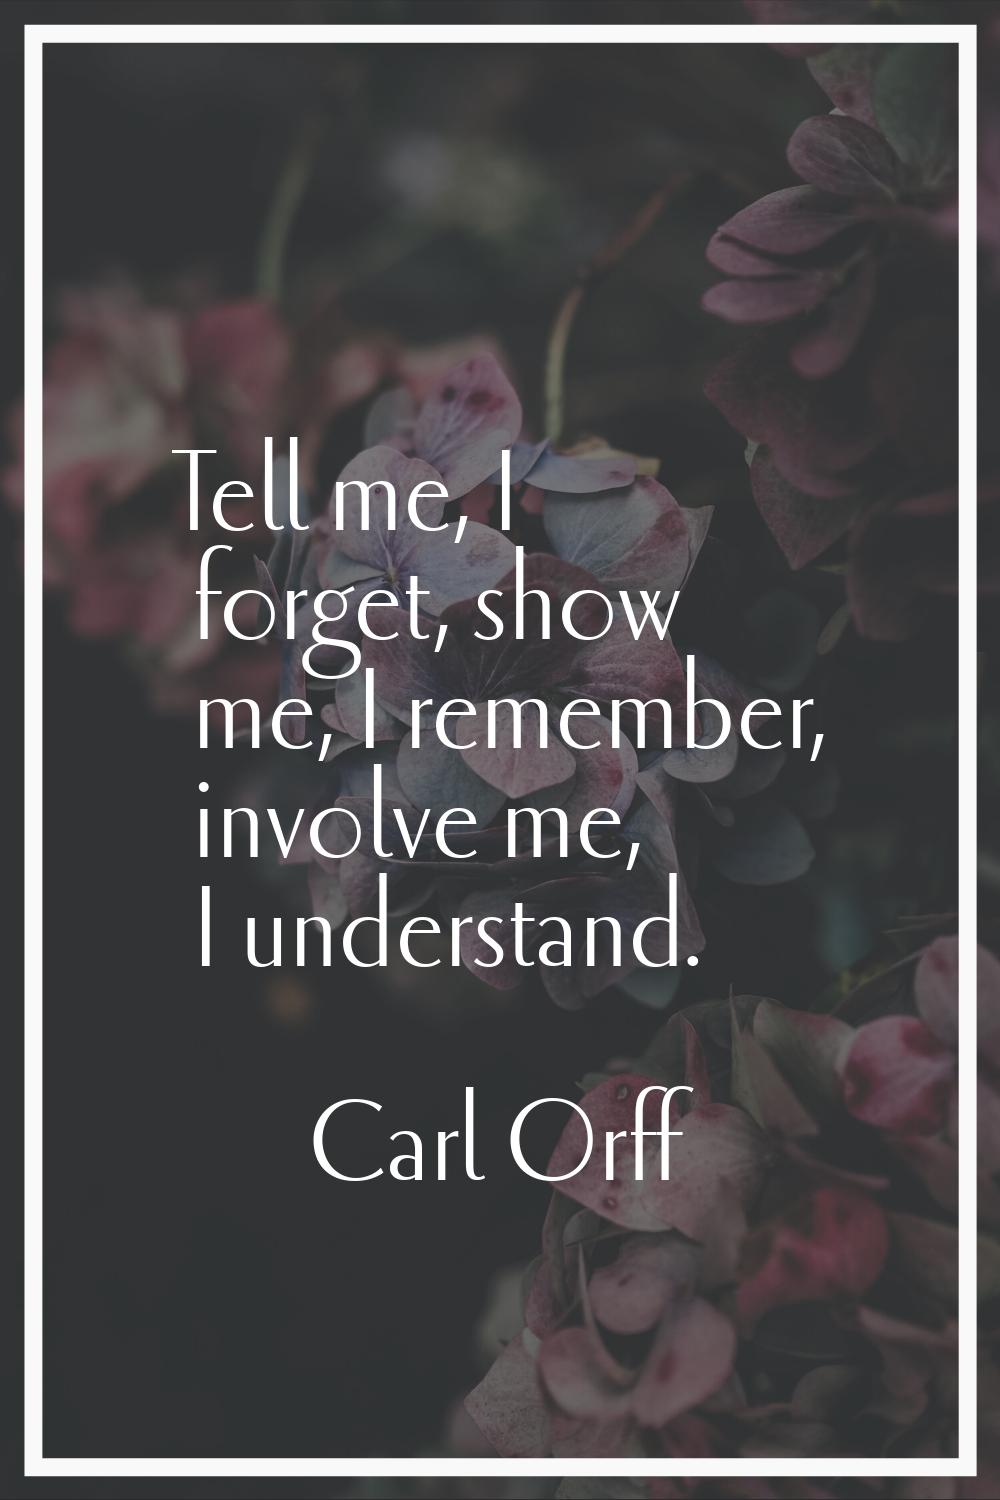 Tell me, I forget, show me, I remember, involve me, I understand.